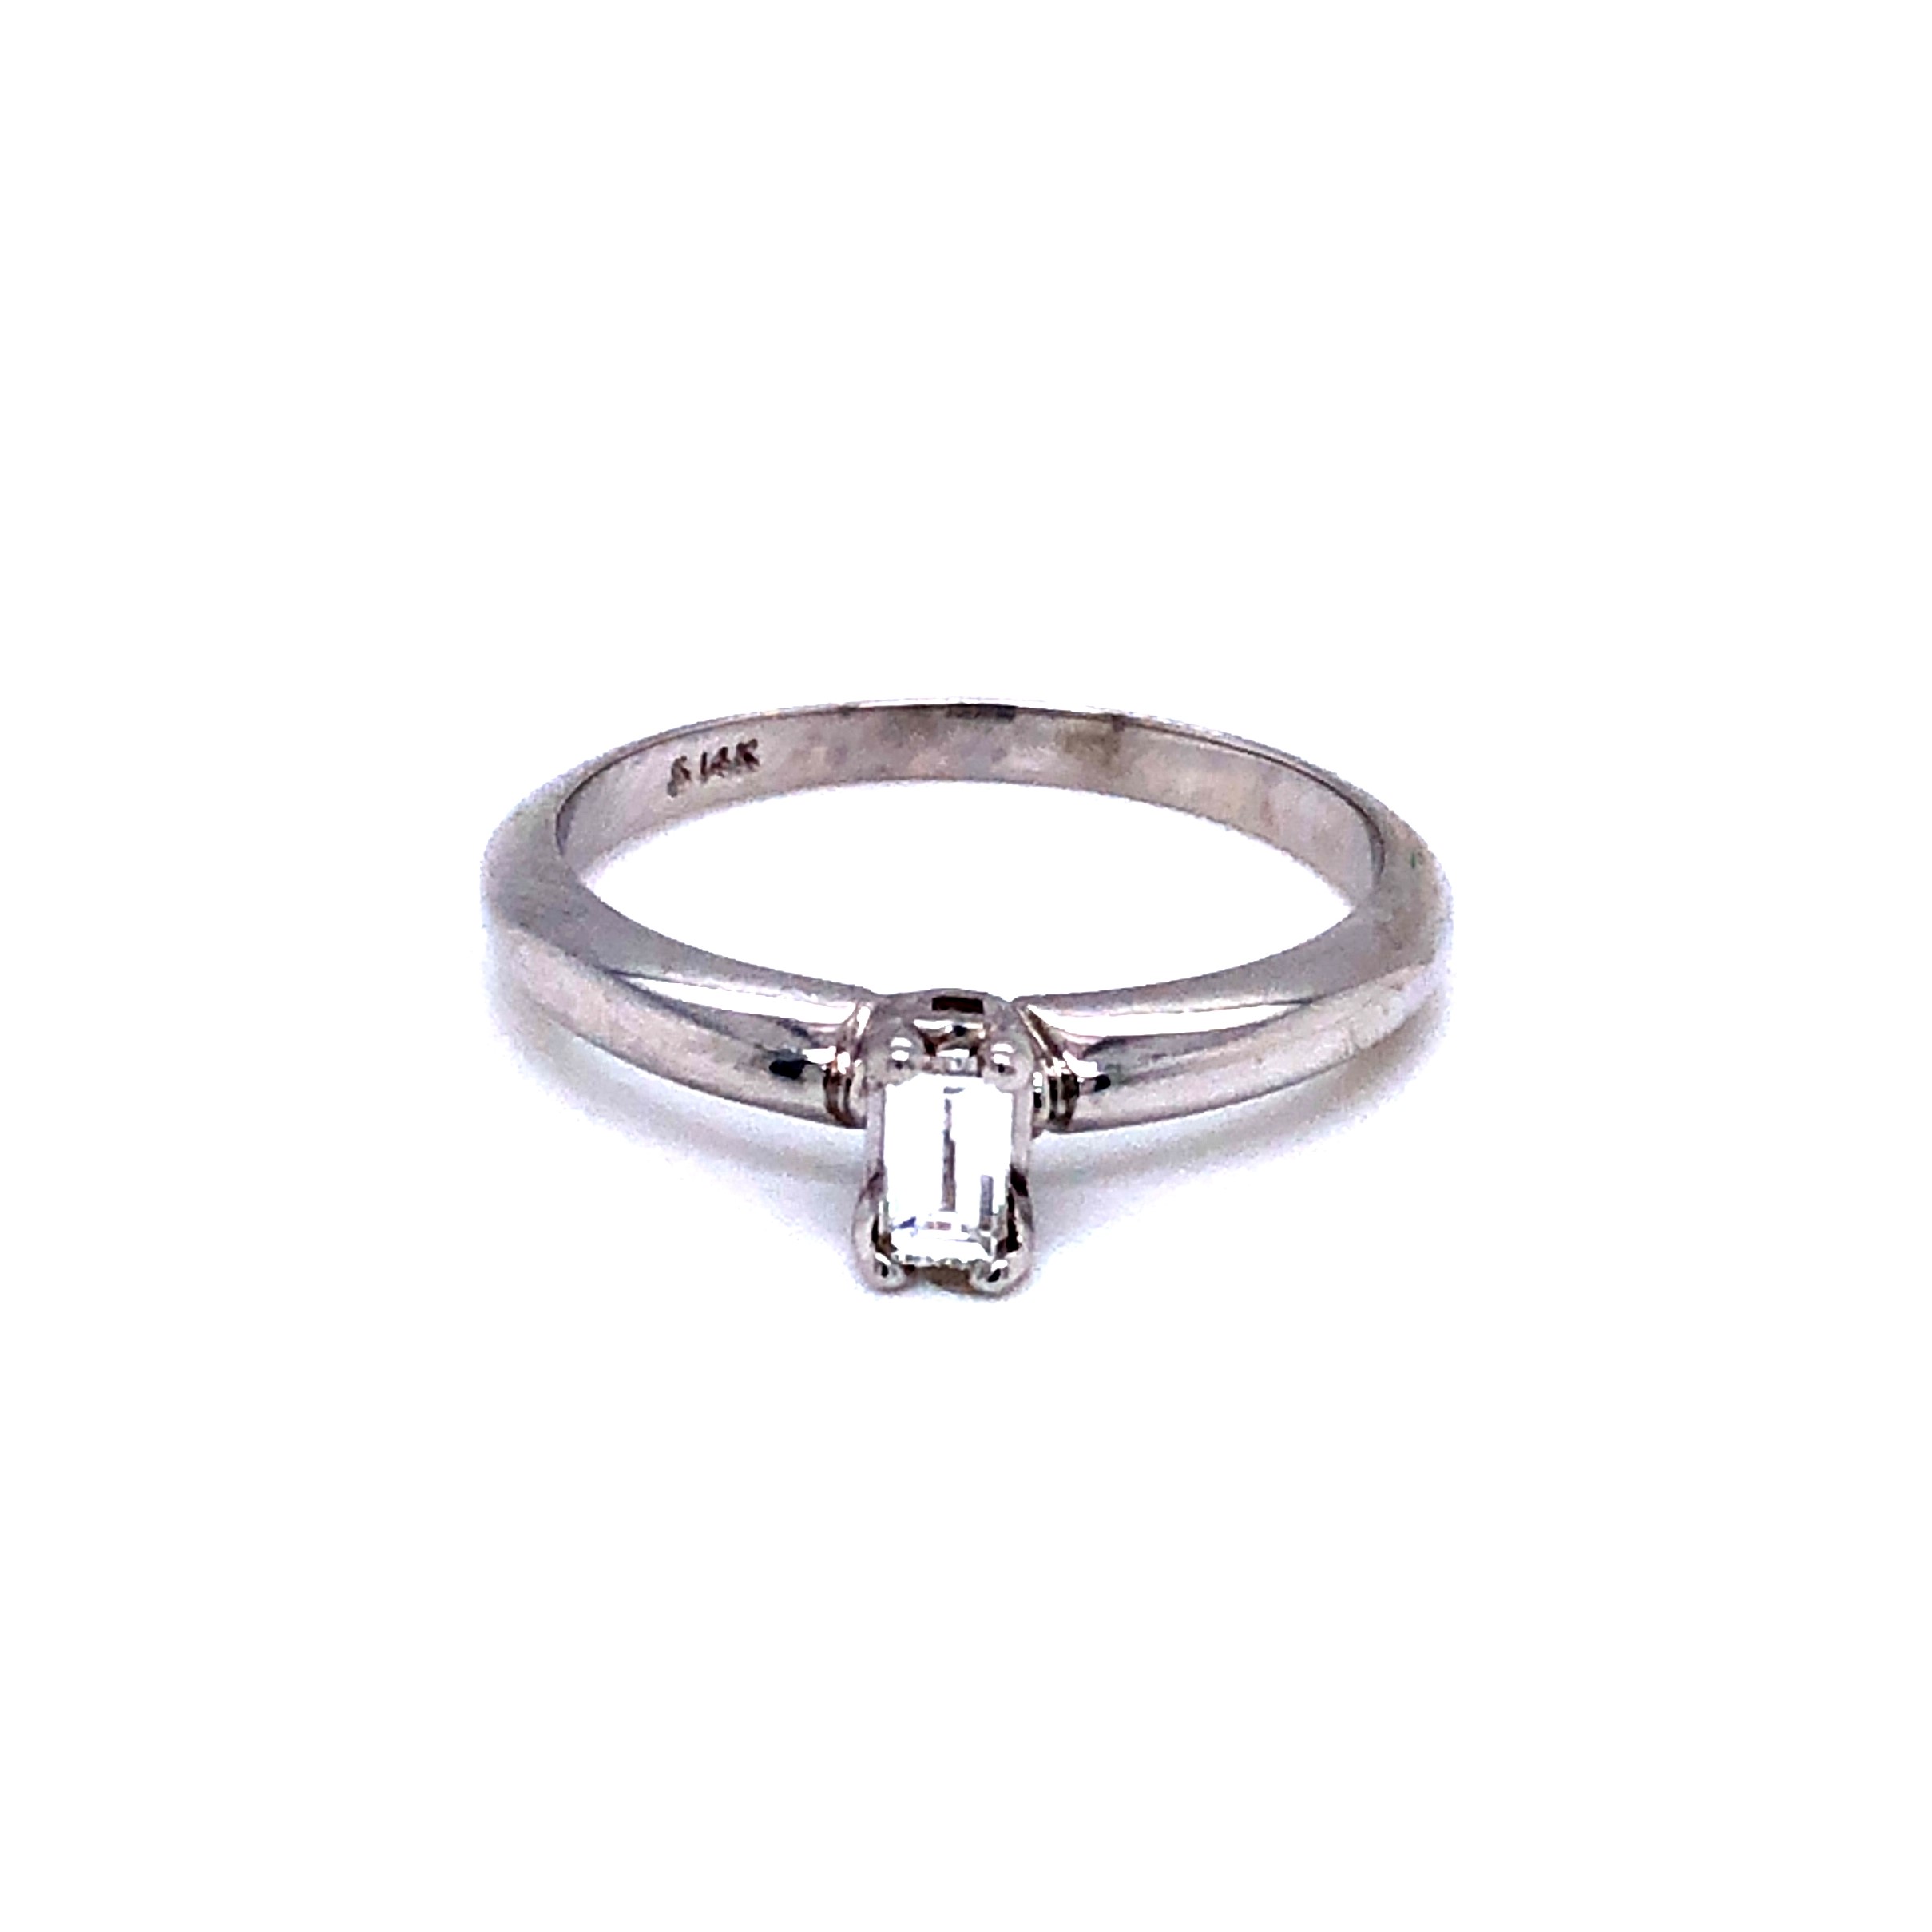 Ladies 14 karat white gold solitaire engagement ring with an Emerald cut diamond weighing 0.18 carat  F color  VS1 clarity.